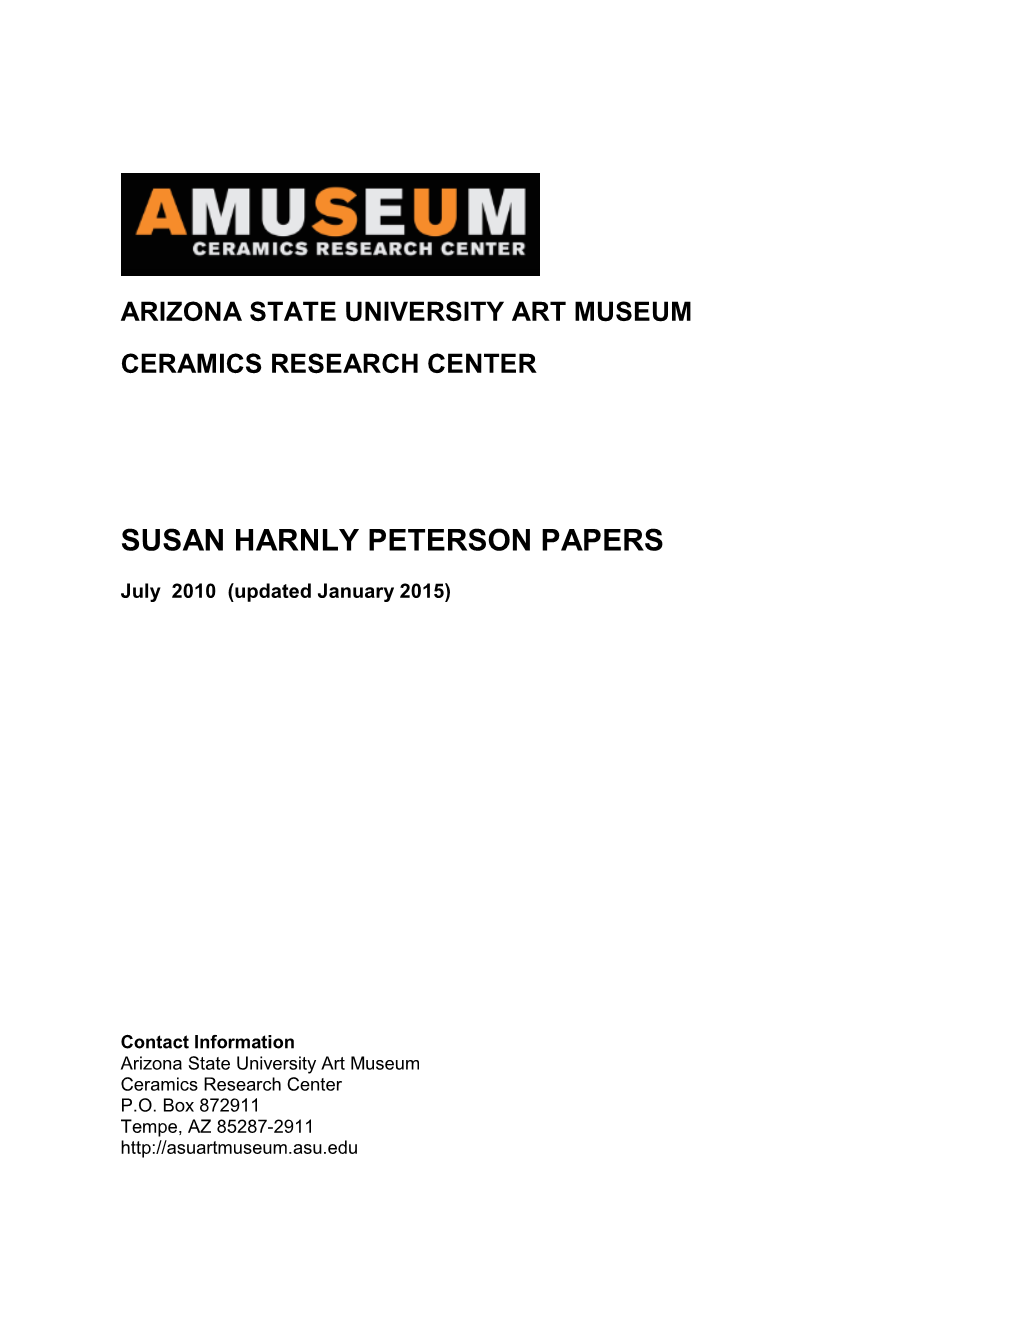 Susan Harnly Peterson Papers